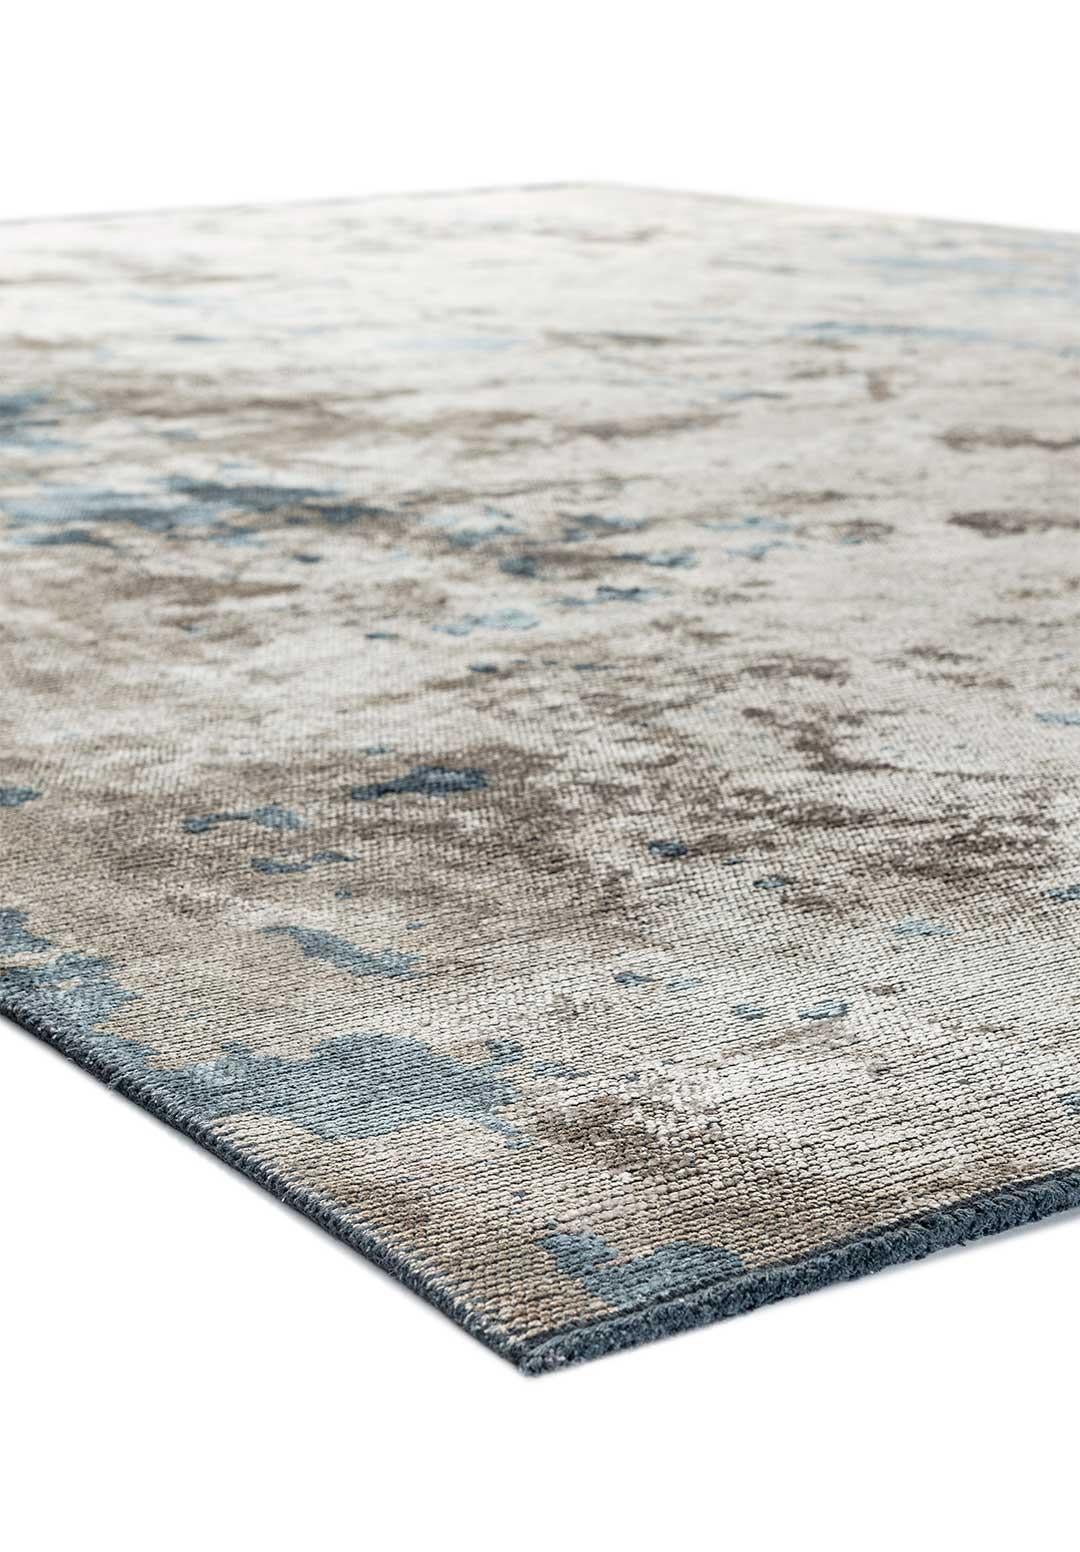 Machine-Made Modernist Beige Gray Light Blue Abstract Fade Pattern Luxury Soft Semi-Plush Rug For Sale